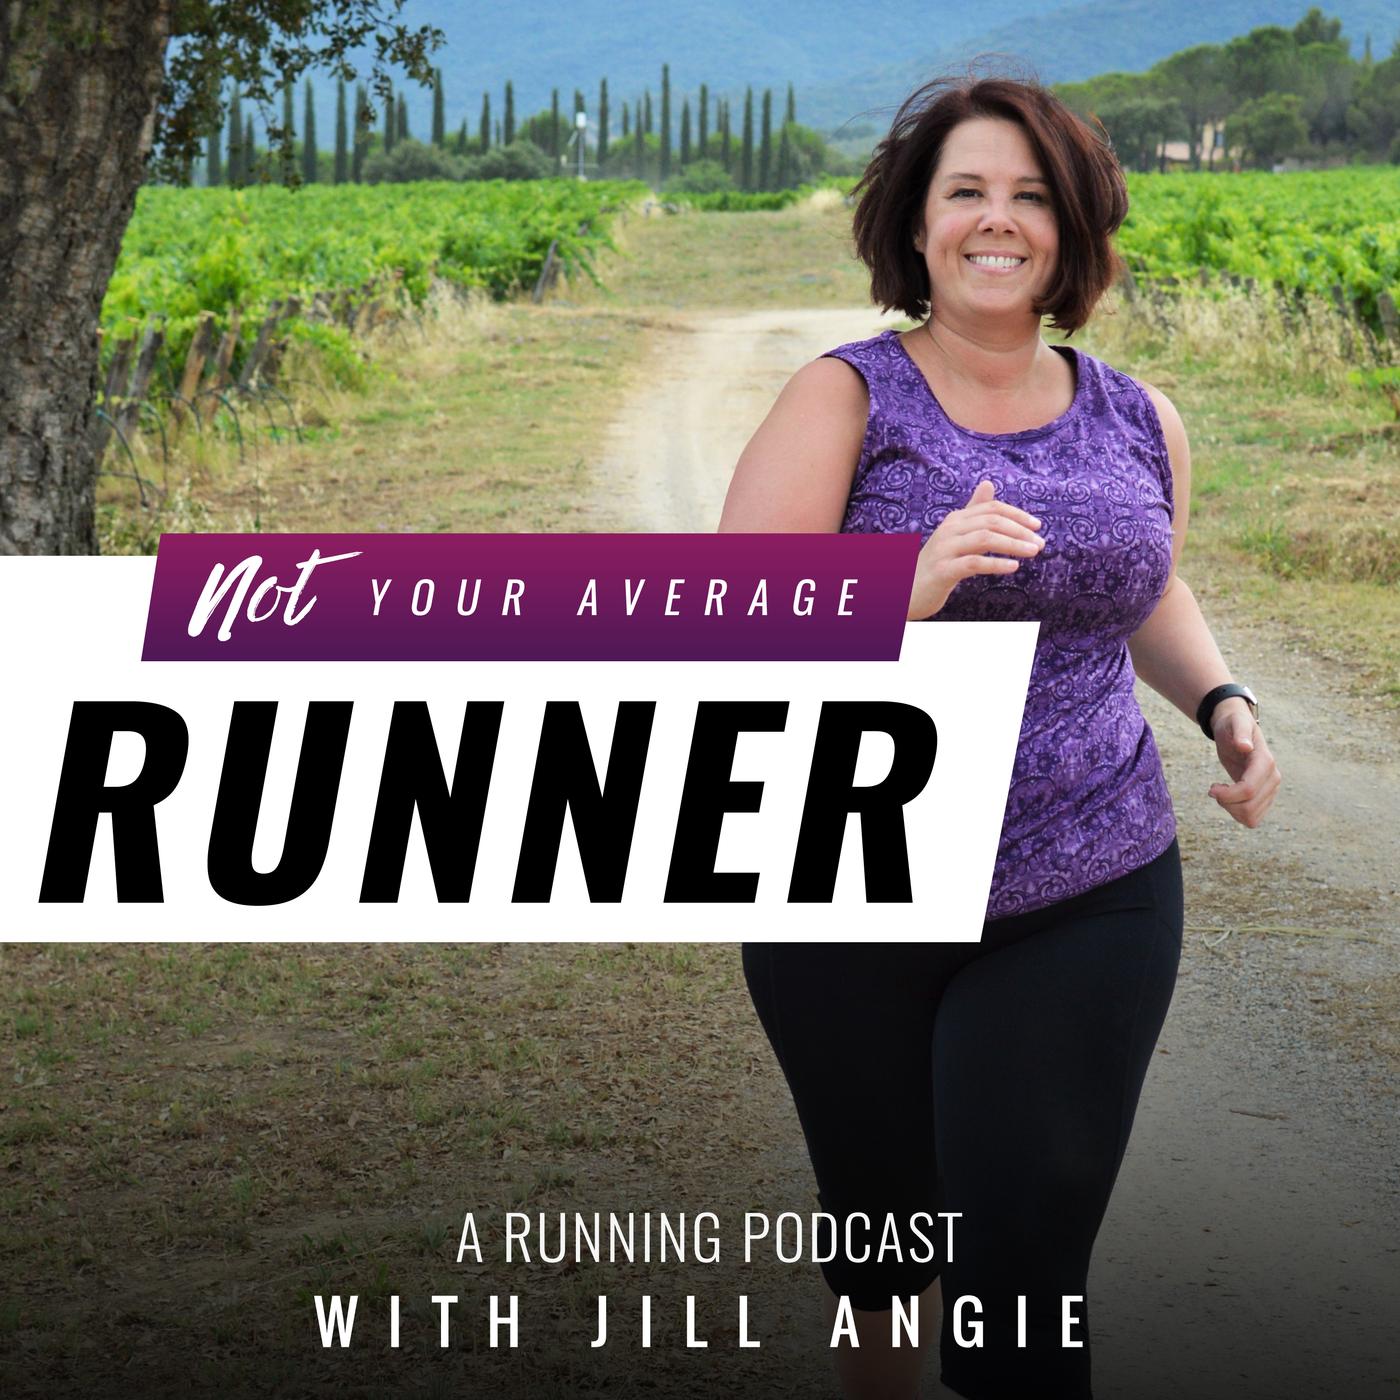 Not your average runner a running podcast with jill angie.